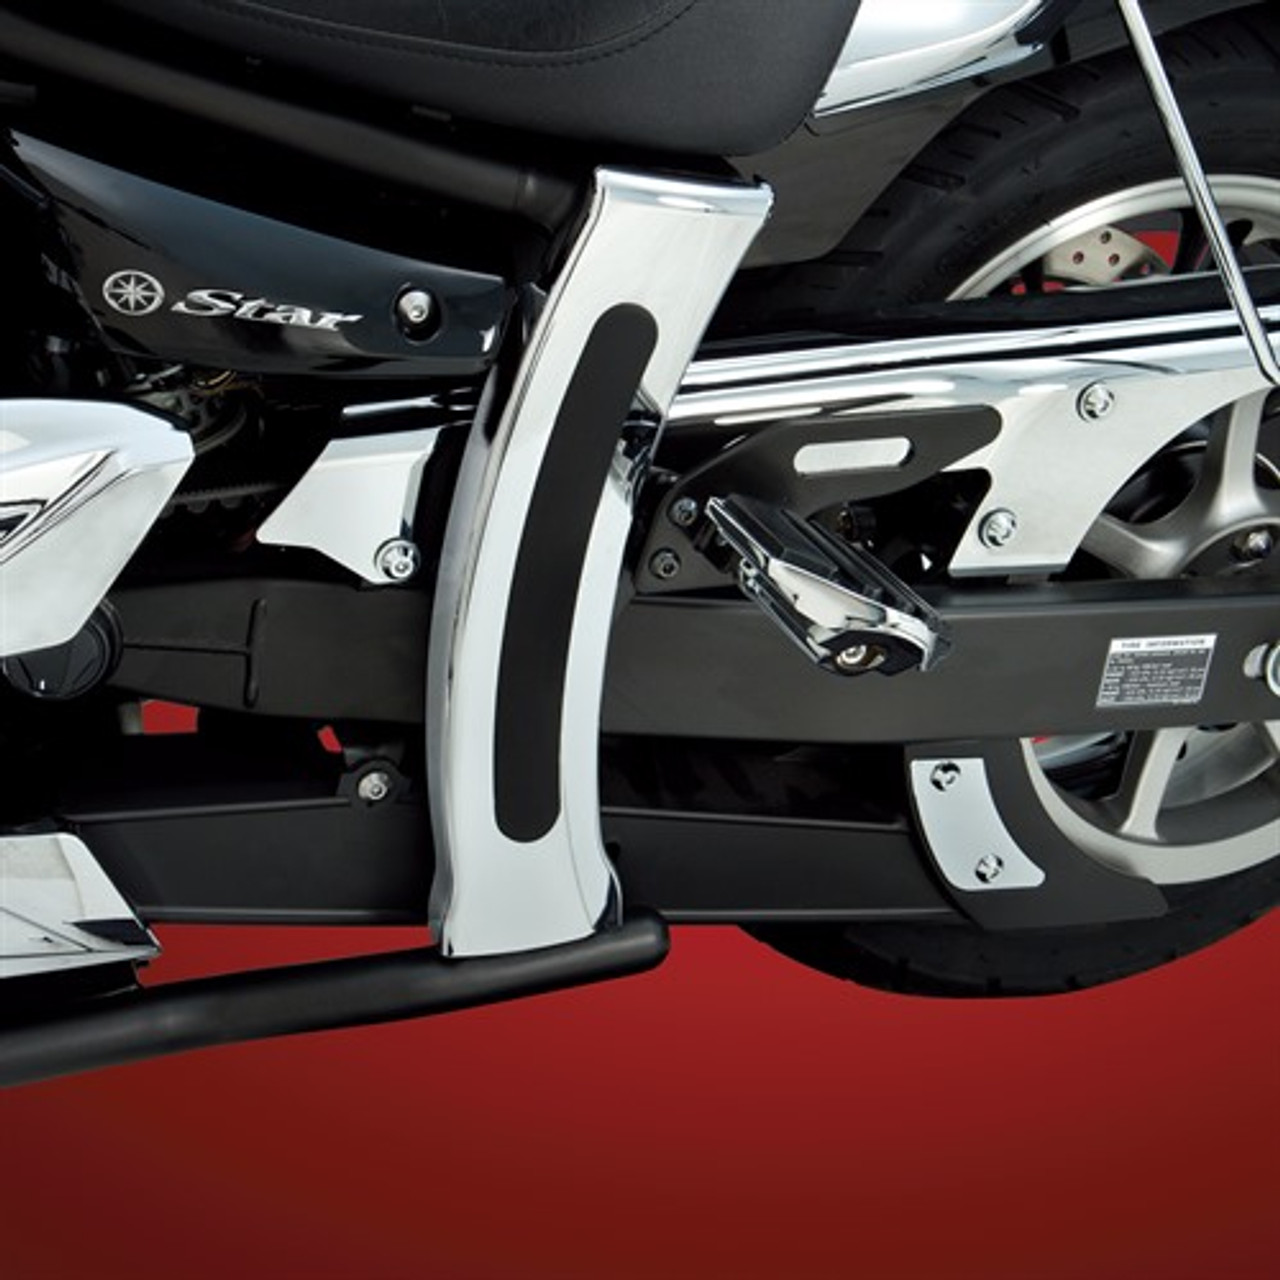 Show Chrome Accessories New Abs Frame Cover Vstar 950, 63-211